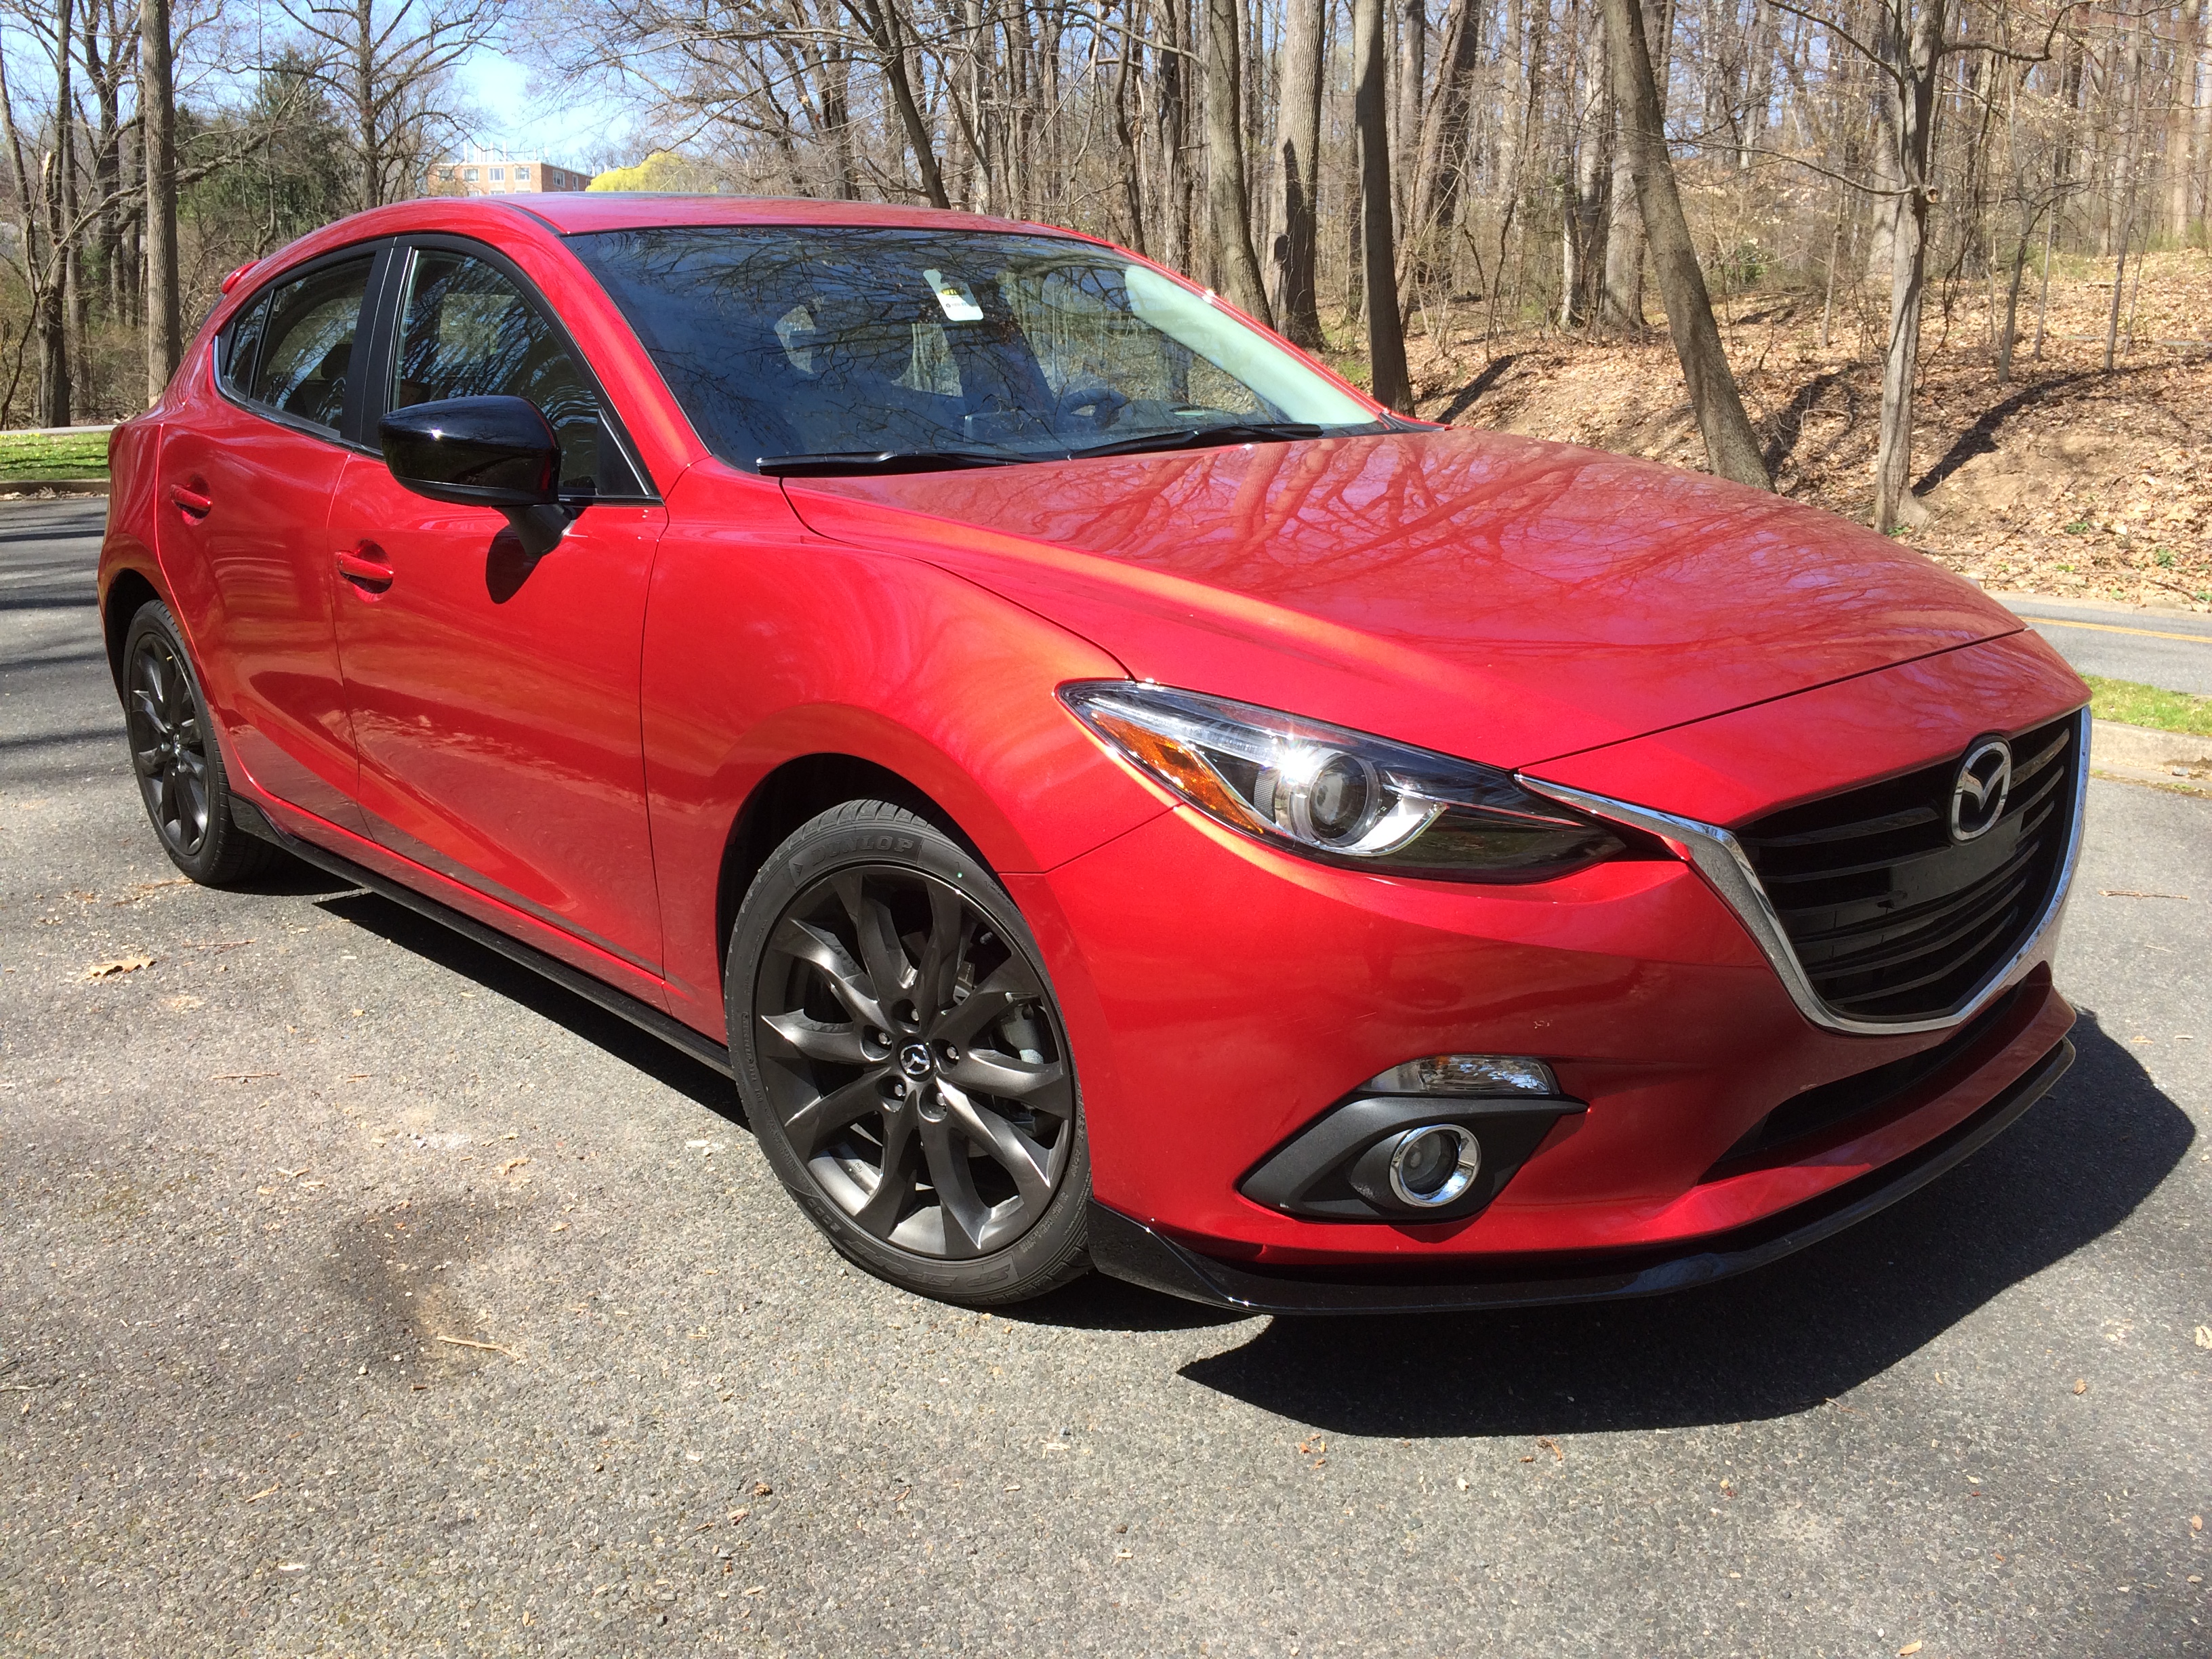 2016 Mazda 3 Grand Touring A hatchback that’s fun to